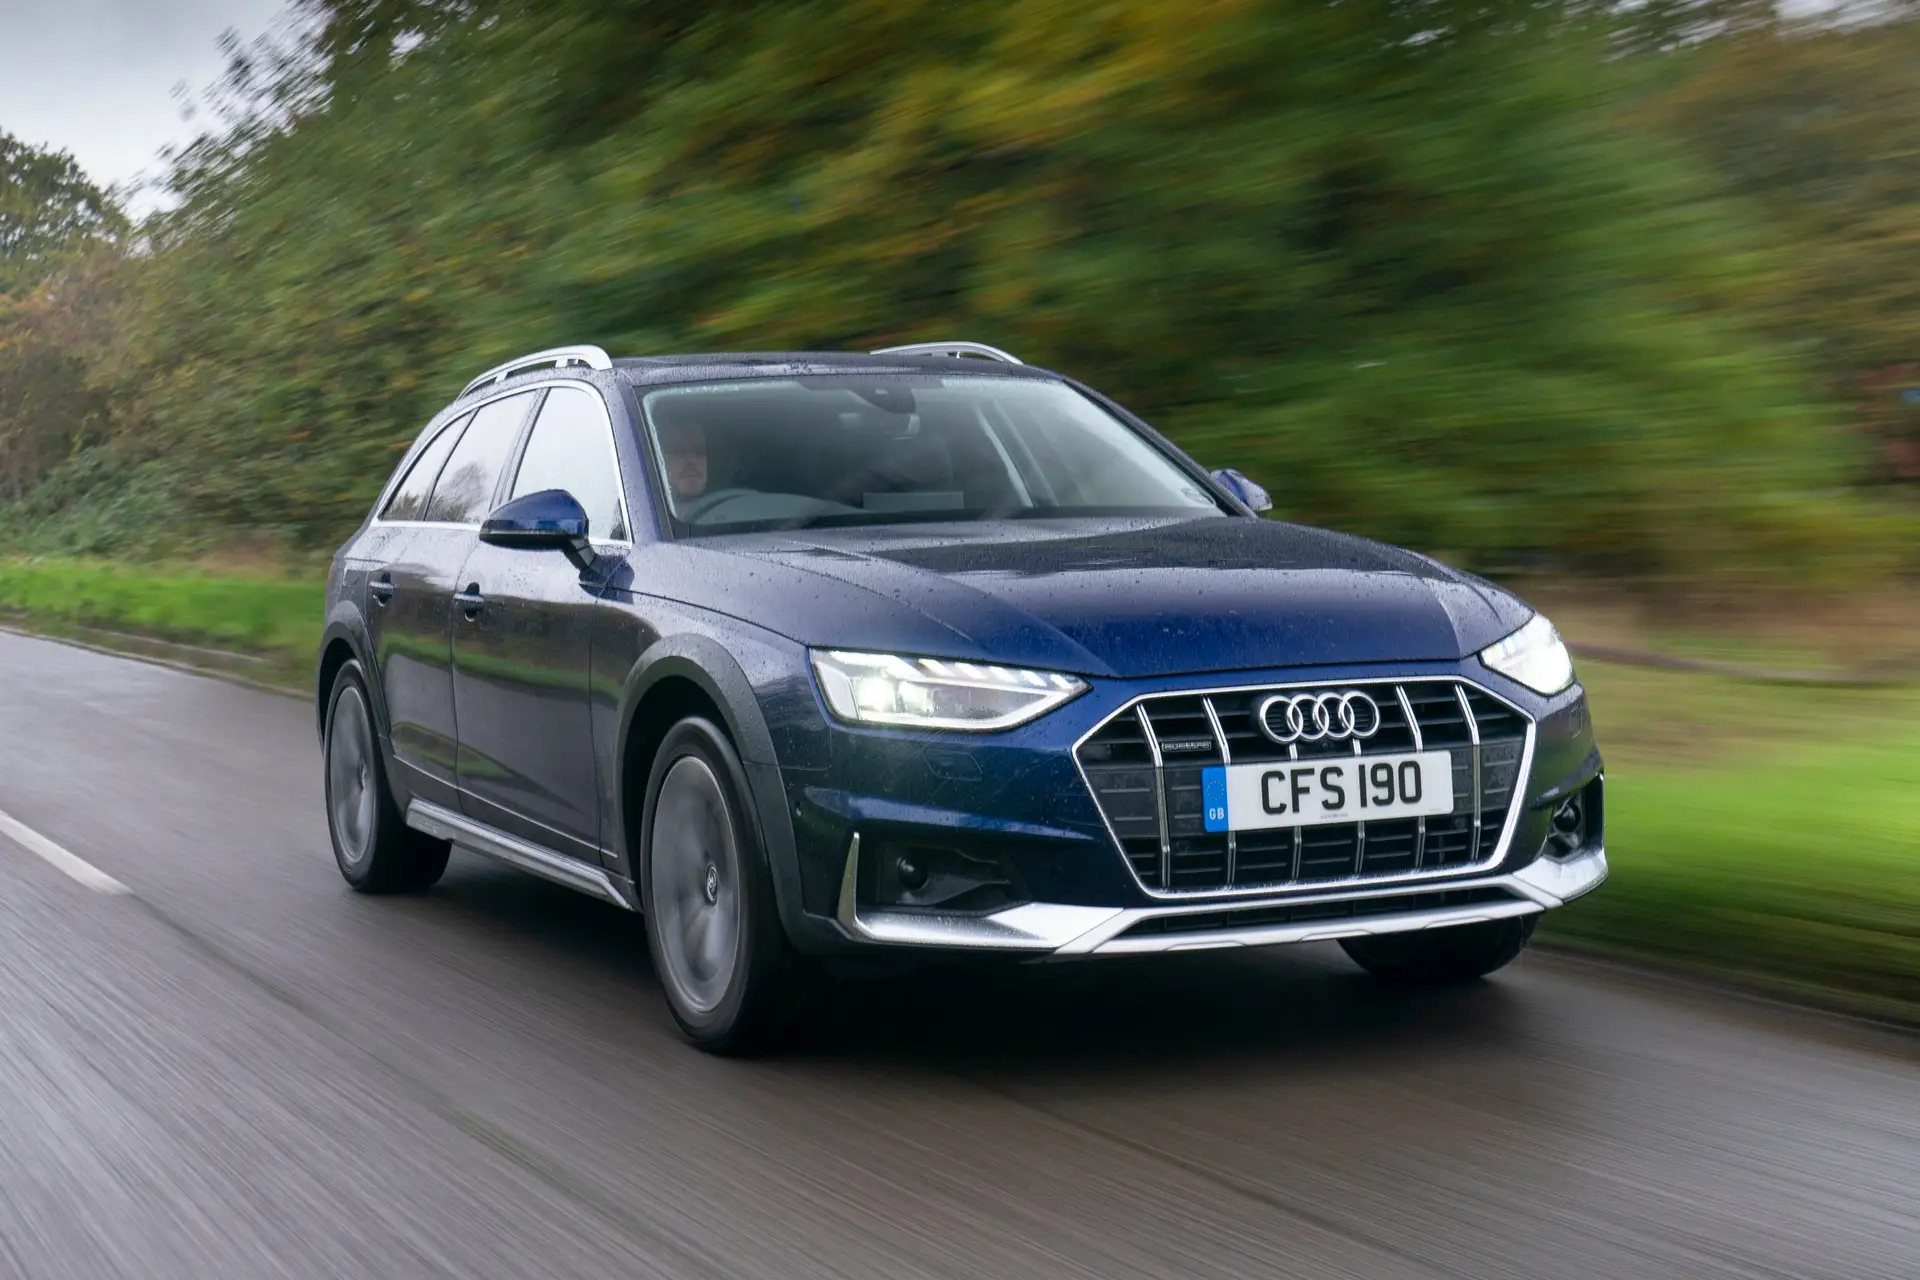 Audi A4 Allroad Review 2023: exterior front three quarter image of the Audi A4 Allroad on the road 